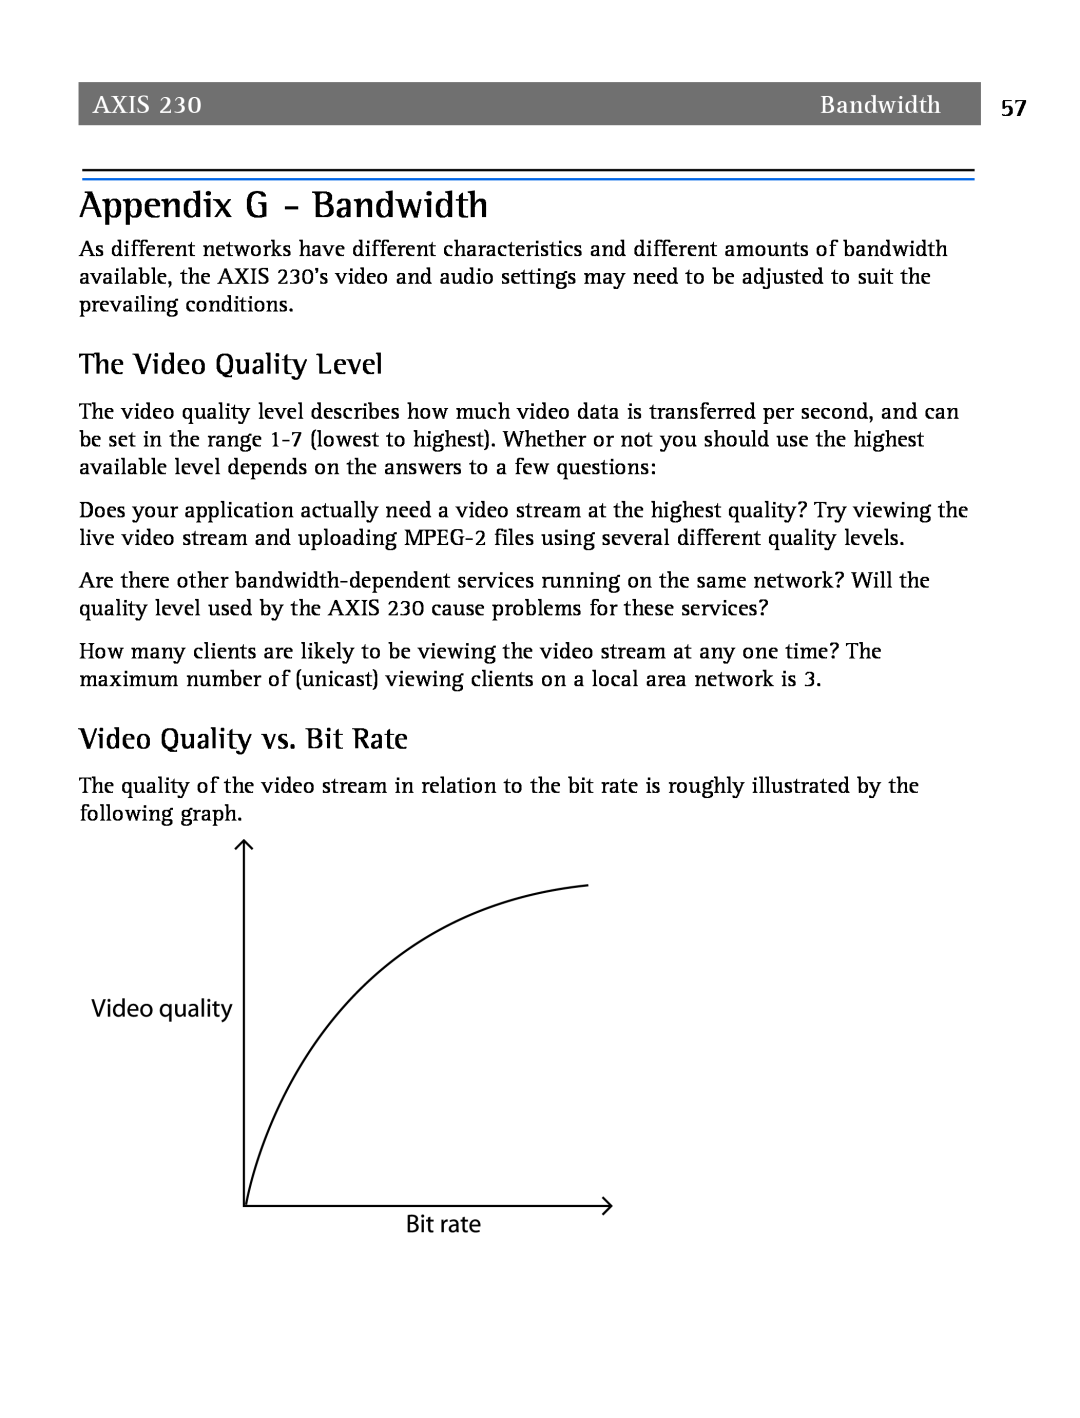 Axis Communications 2 user manual Appendix G - Bandwidth, The Video Quality Level, Video Quality vs. Bit Rate, Axis 